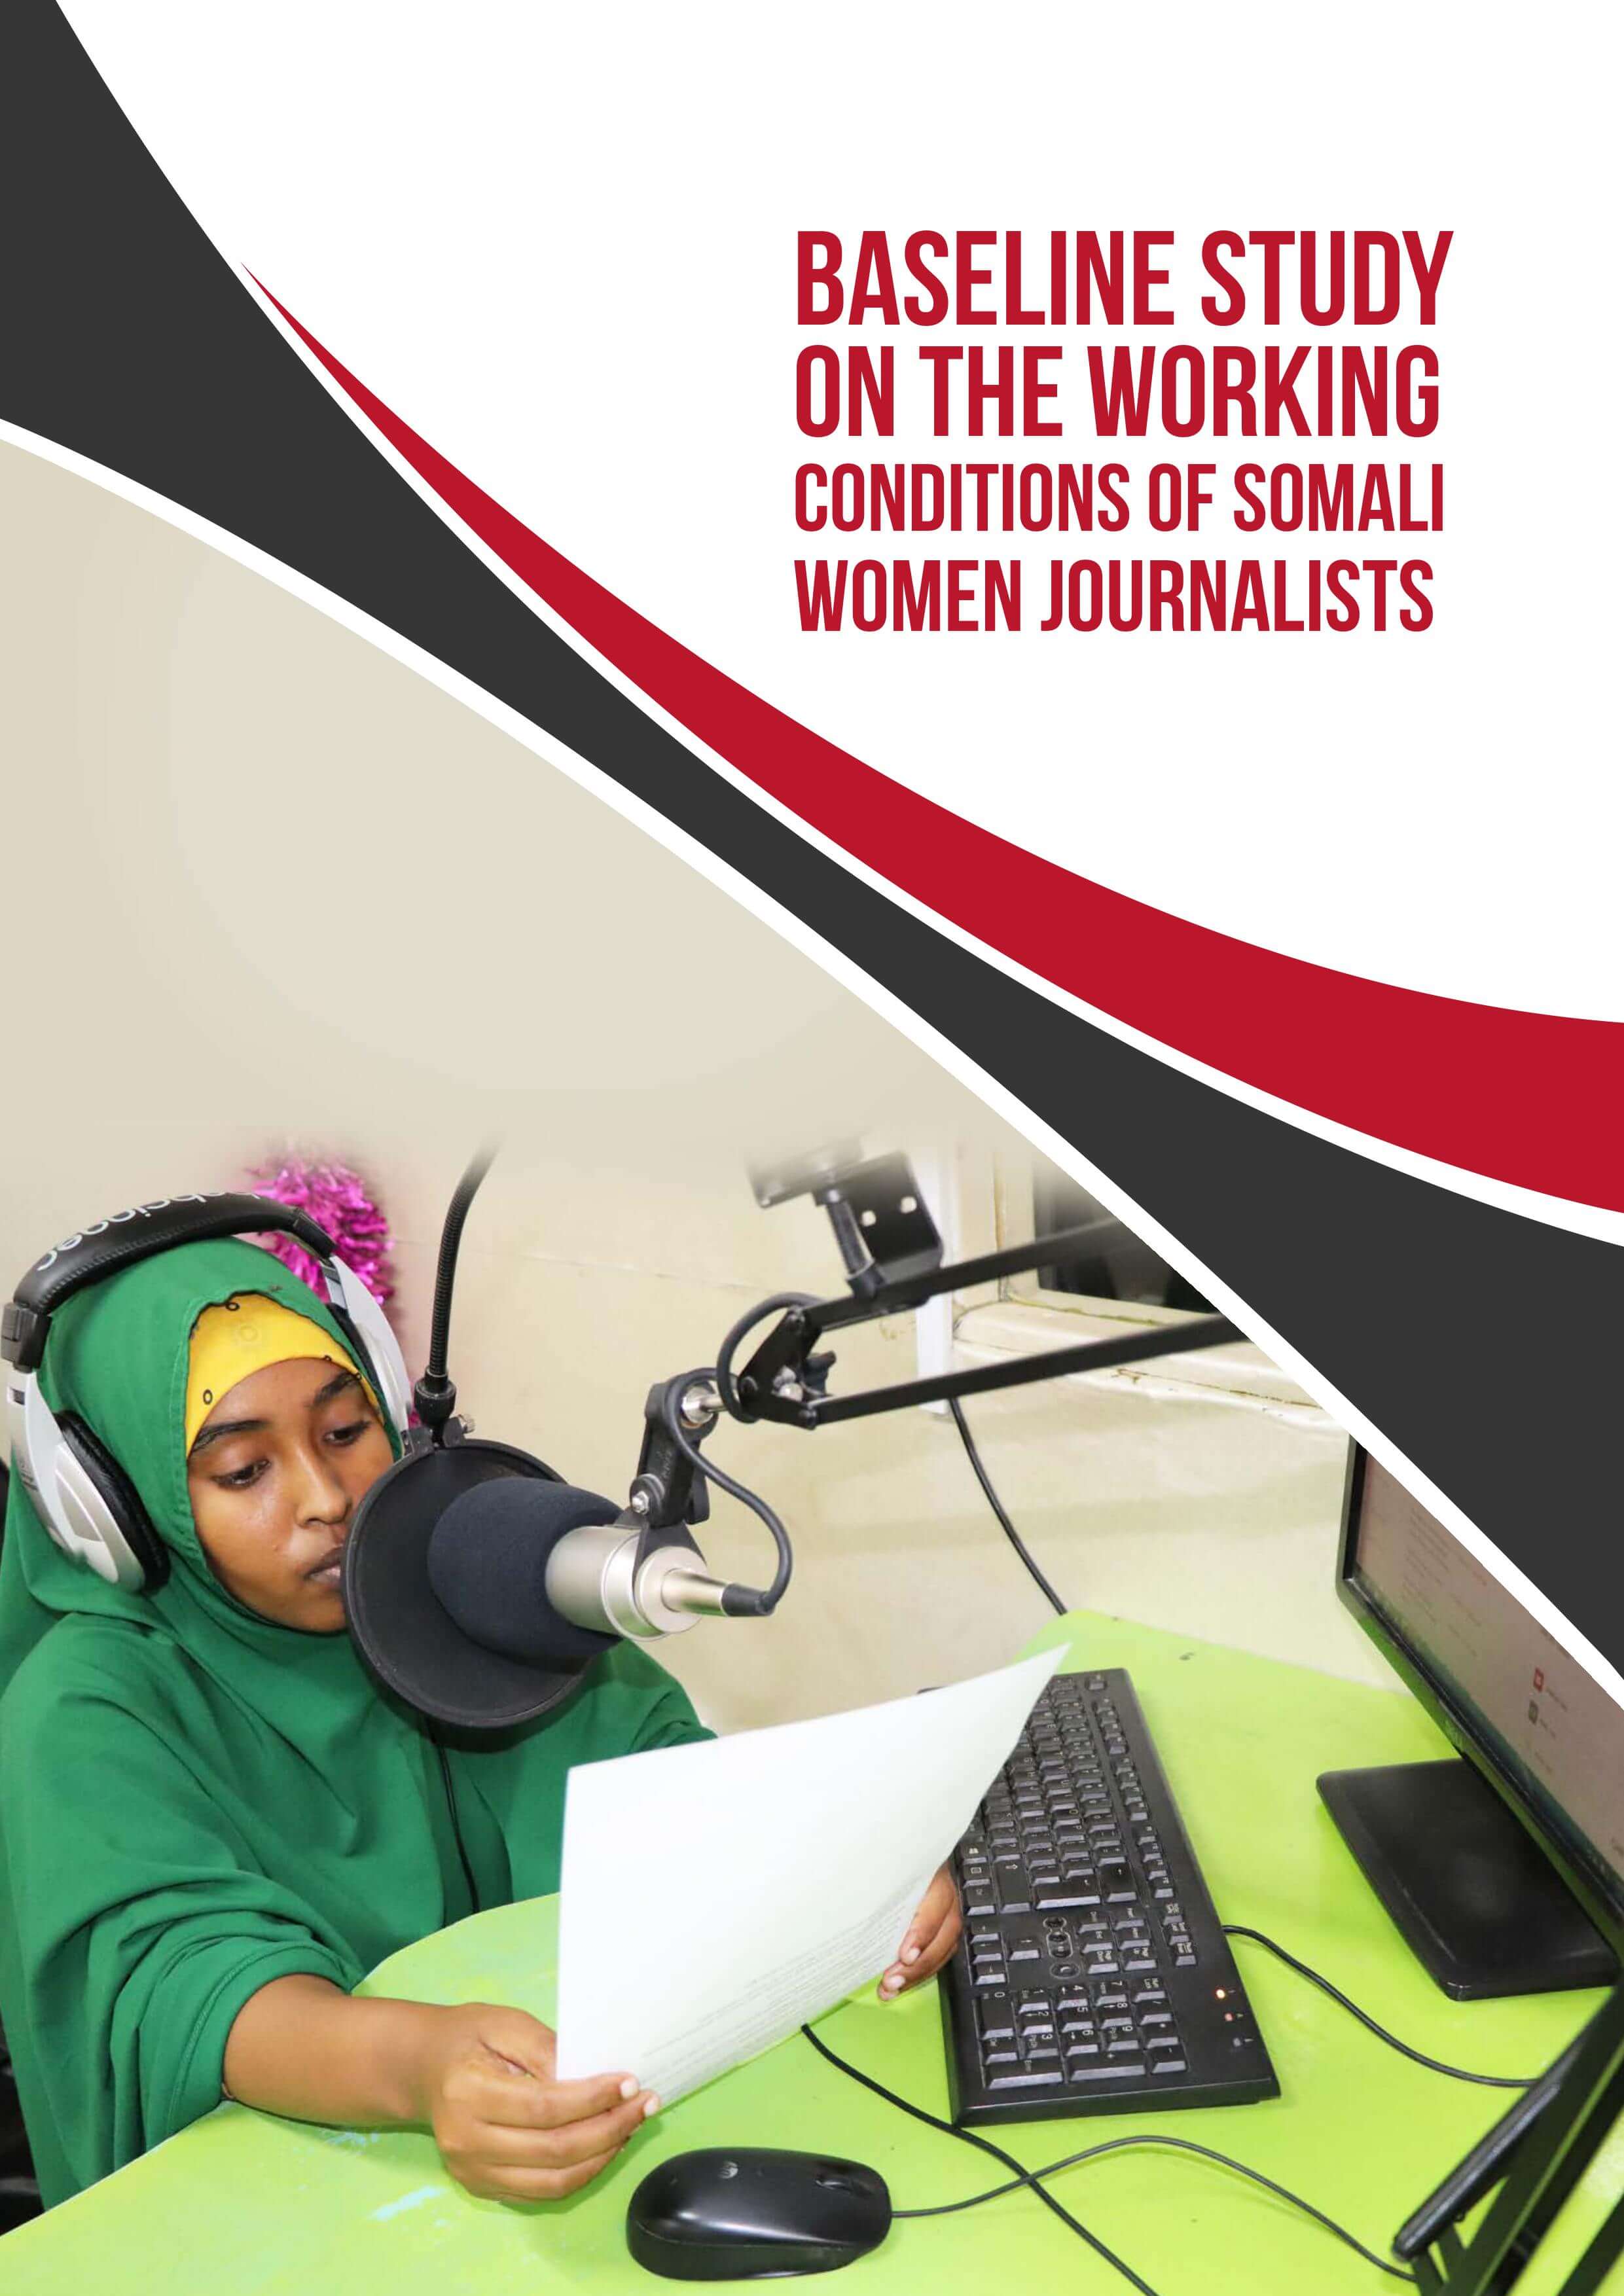 Baseline study on the working conditions of Somali women journalists